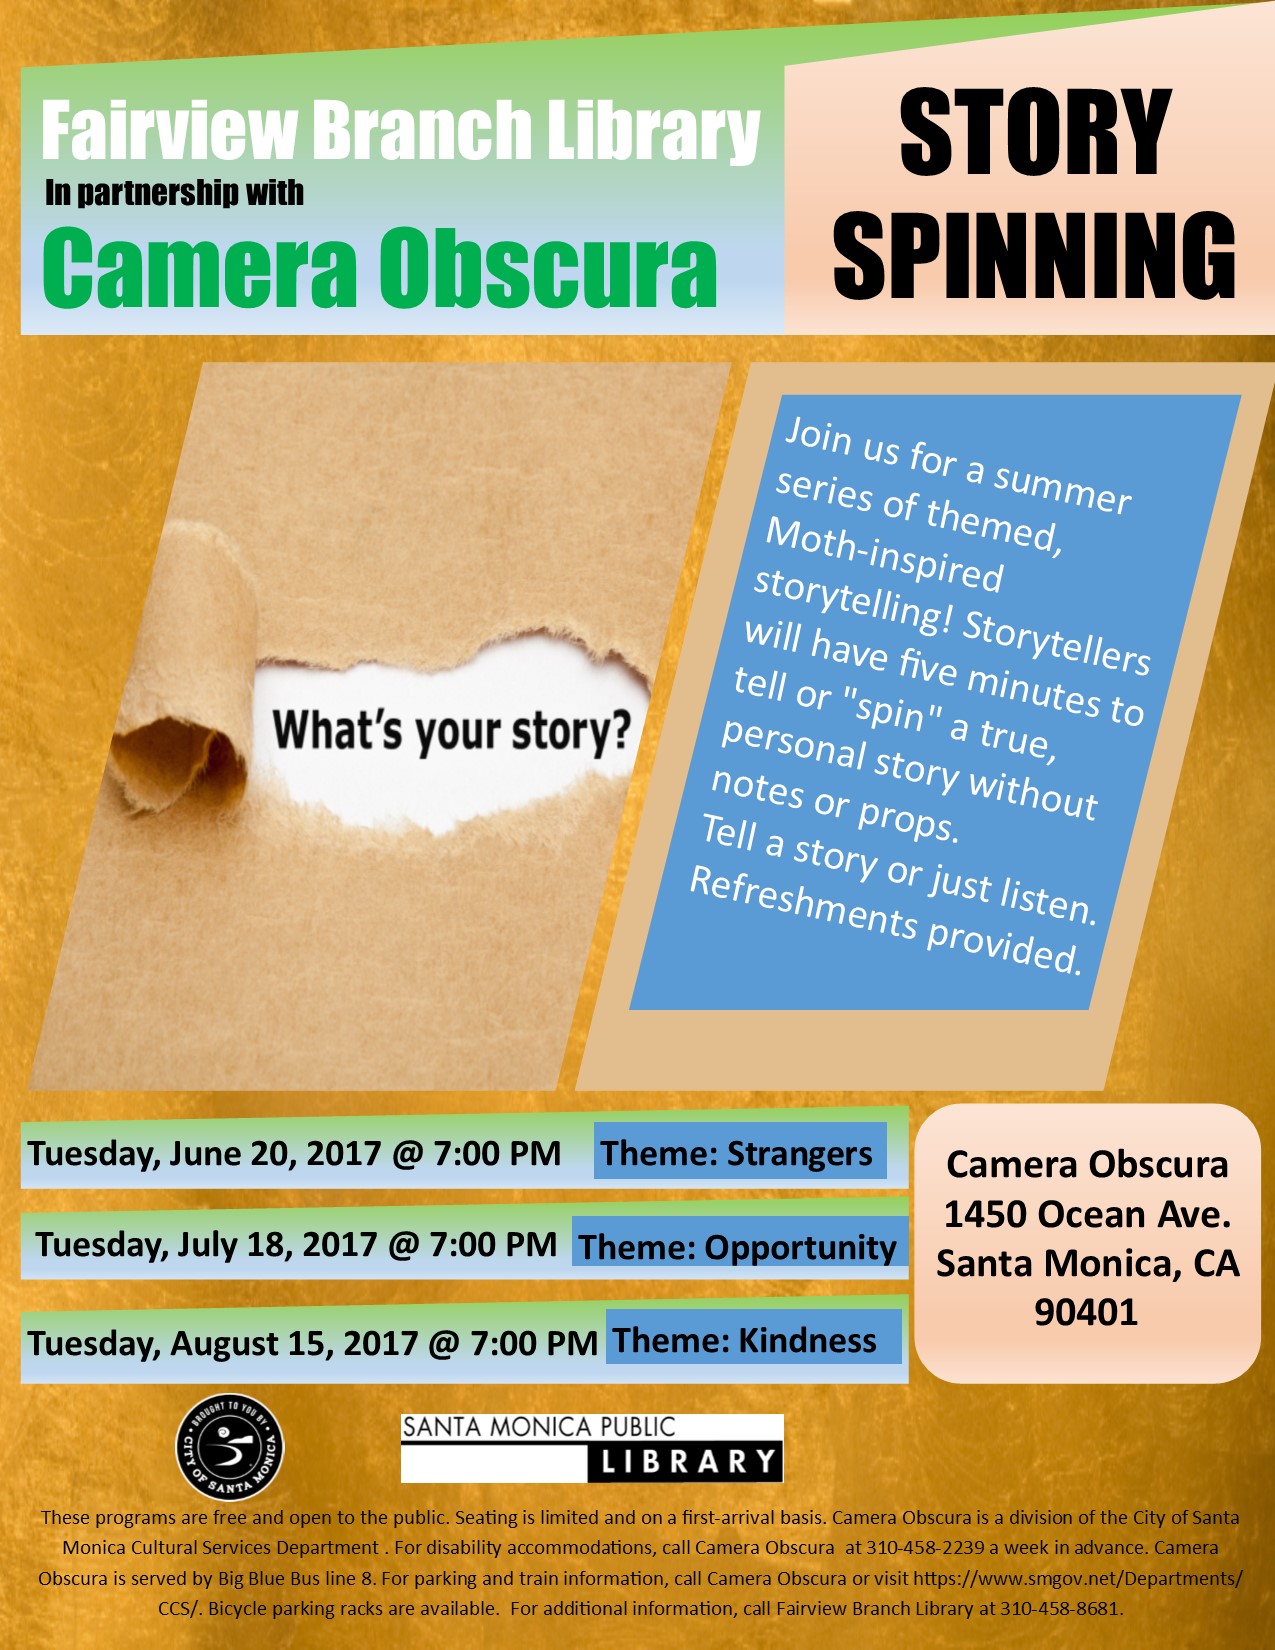 Santa Monica Public Library Story Spinning, July Theme: Opportunity